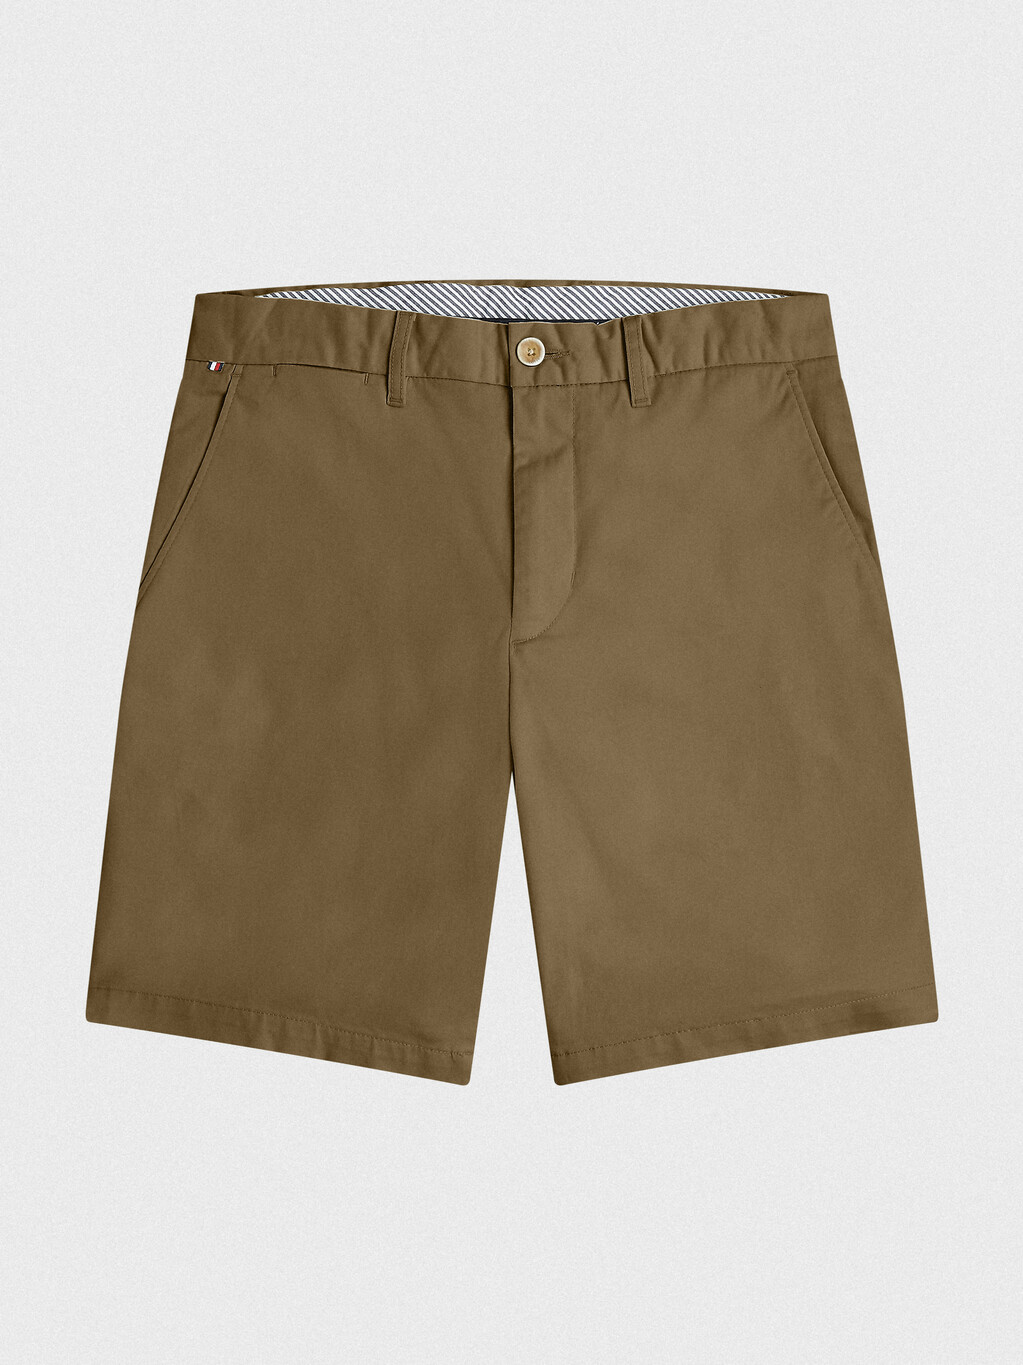 1985 Collection Brooklyn Twill Shorts, Army Green, hi-res